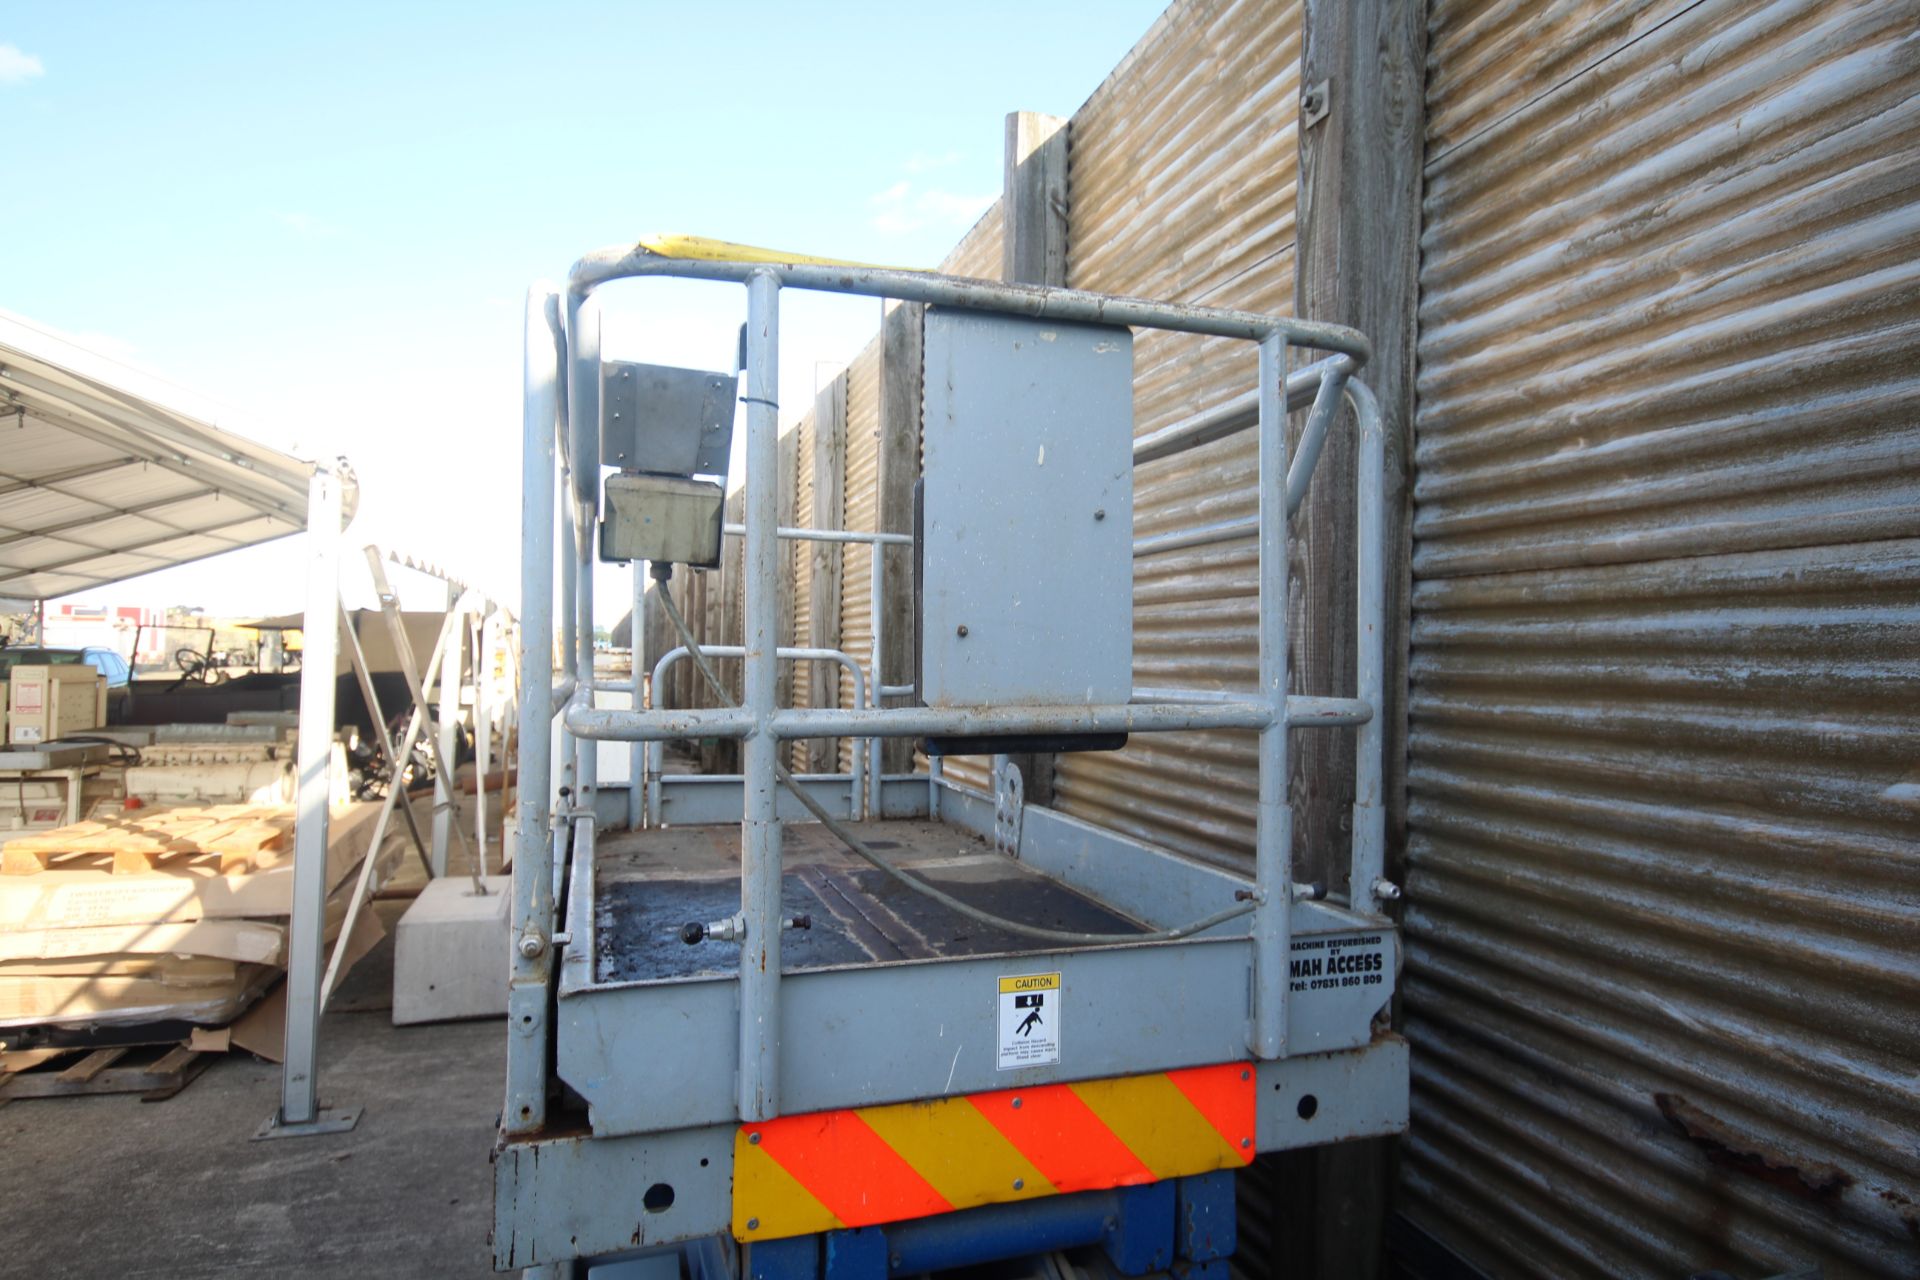 Upright X26 electric scissor lift. 1996. 858 hours. Serial number 2951. Inspected through to 02/02/ - Image 3 of 20